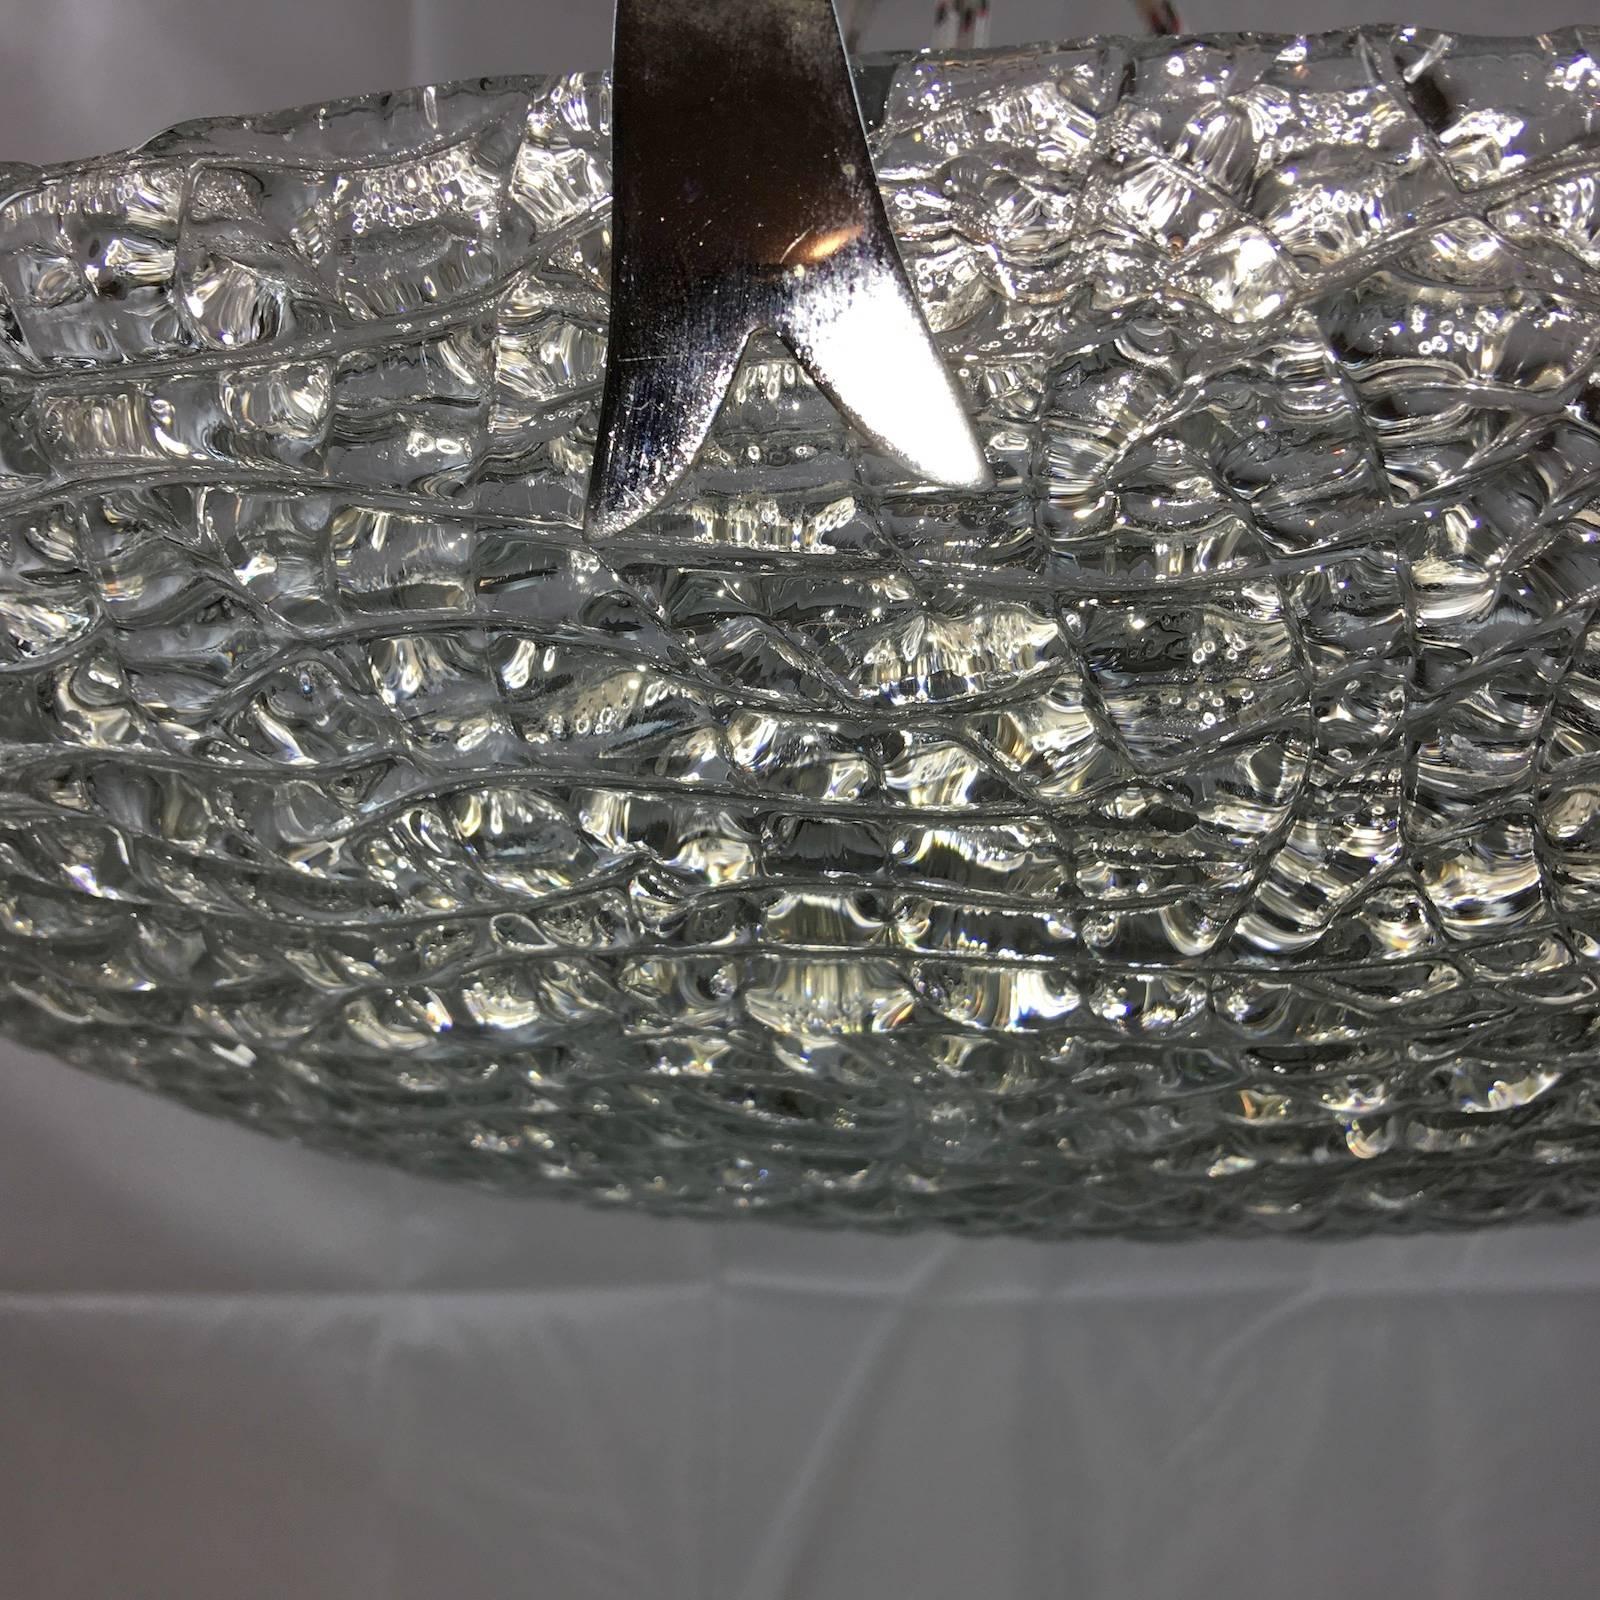 Huge Massive Textured Glass Flush Mount with Chrome Hardware In Good Condition For Sale In Frisco, TX